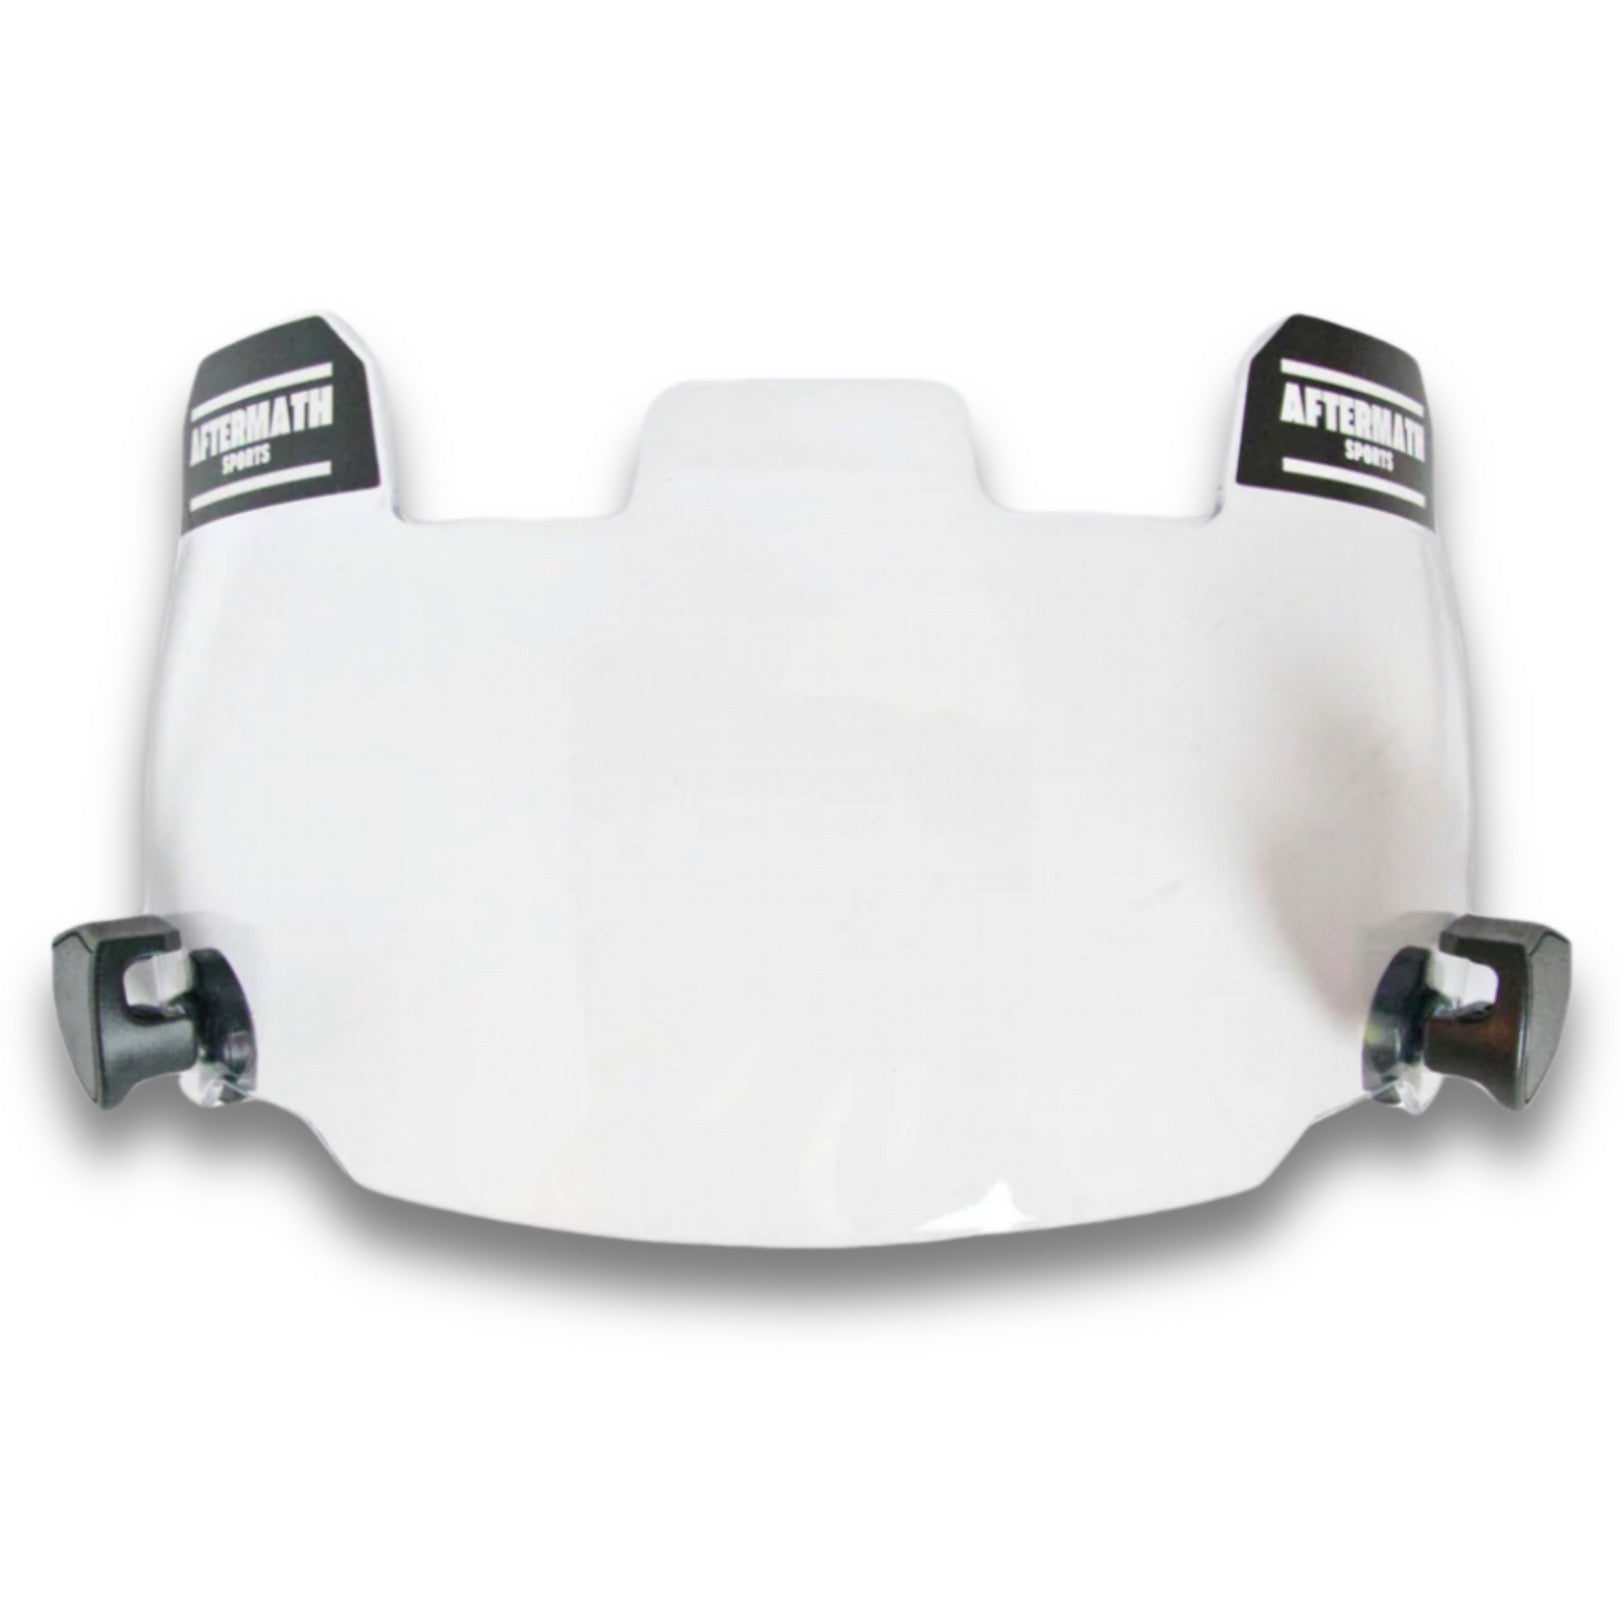 Aftermath Football Visor (Clear) – Aftermath Sports